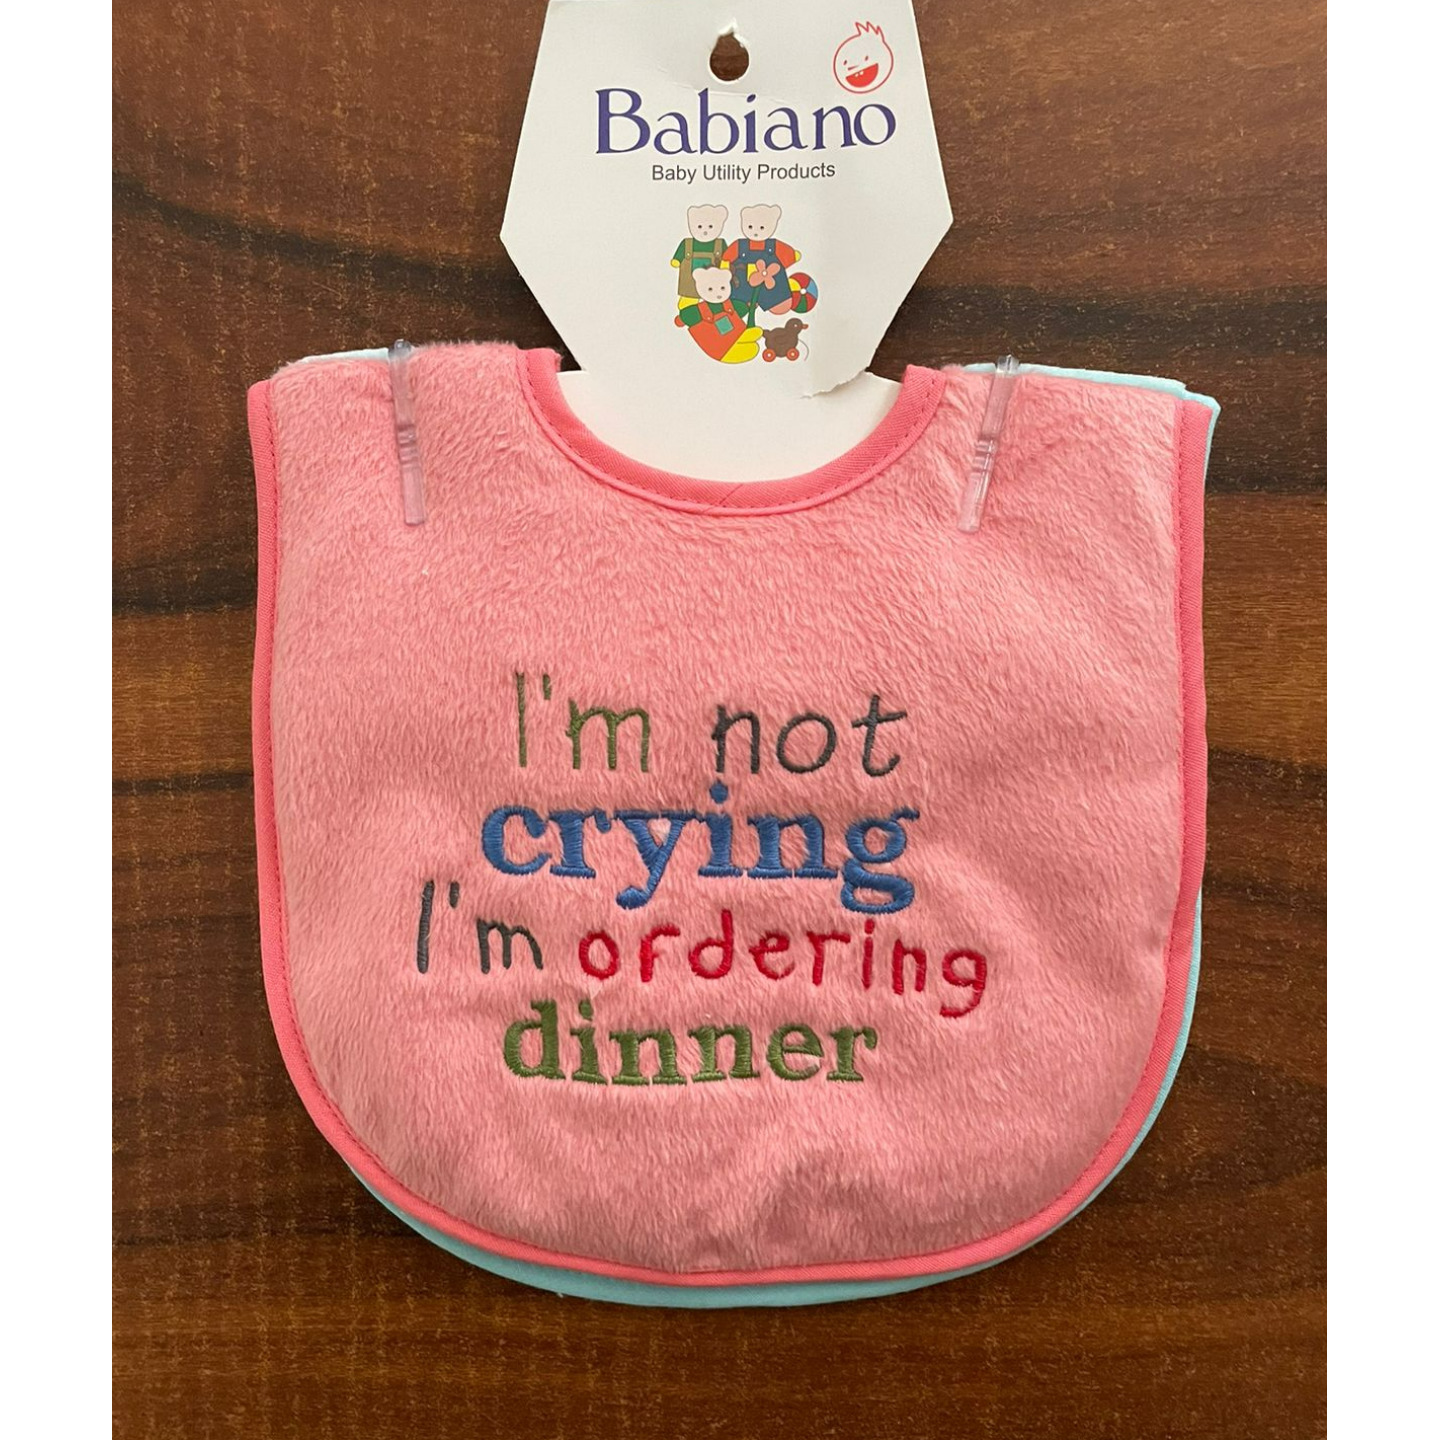 Babiano Pack of 2 Bibs Rs 260 Only